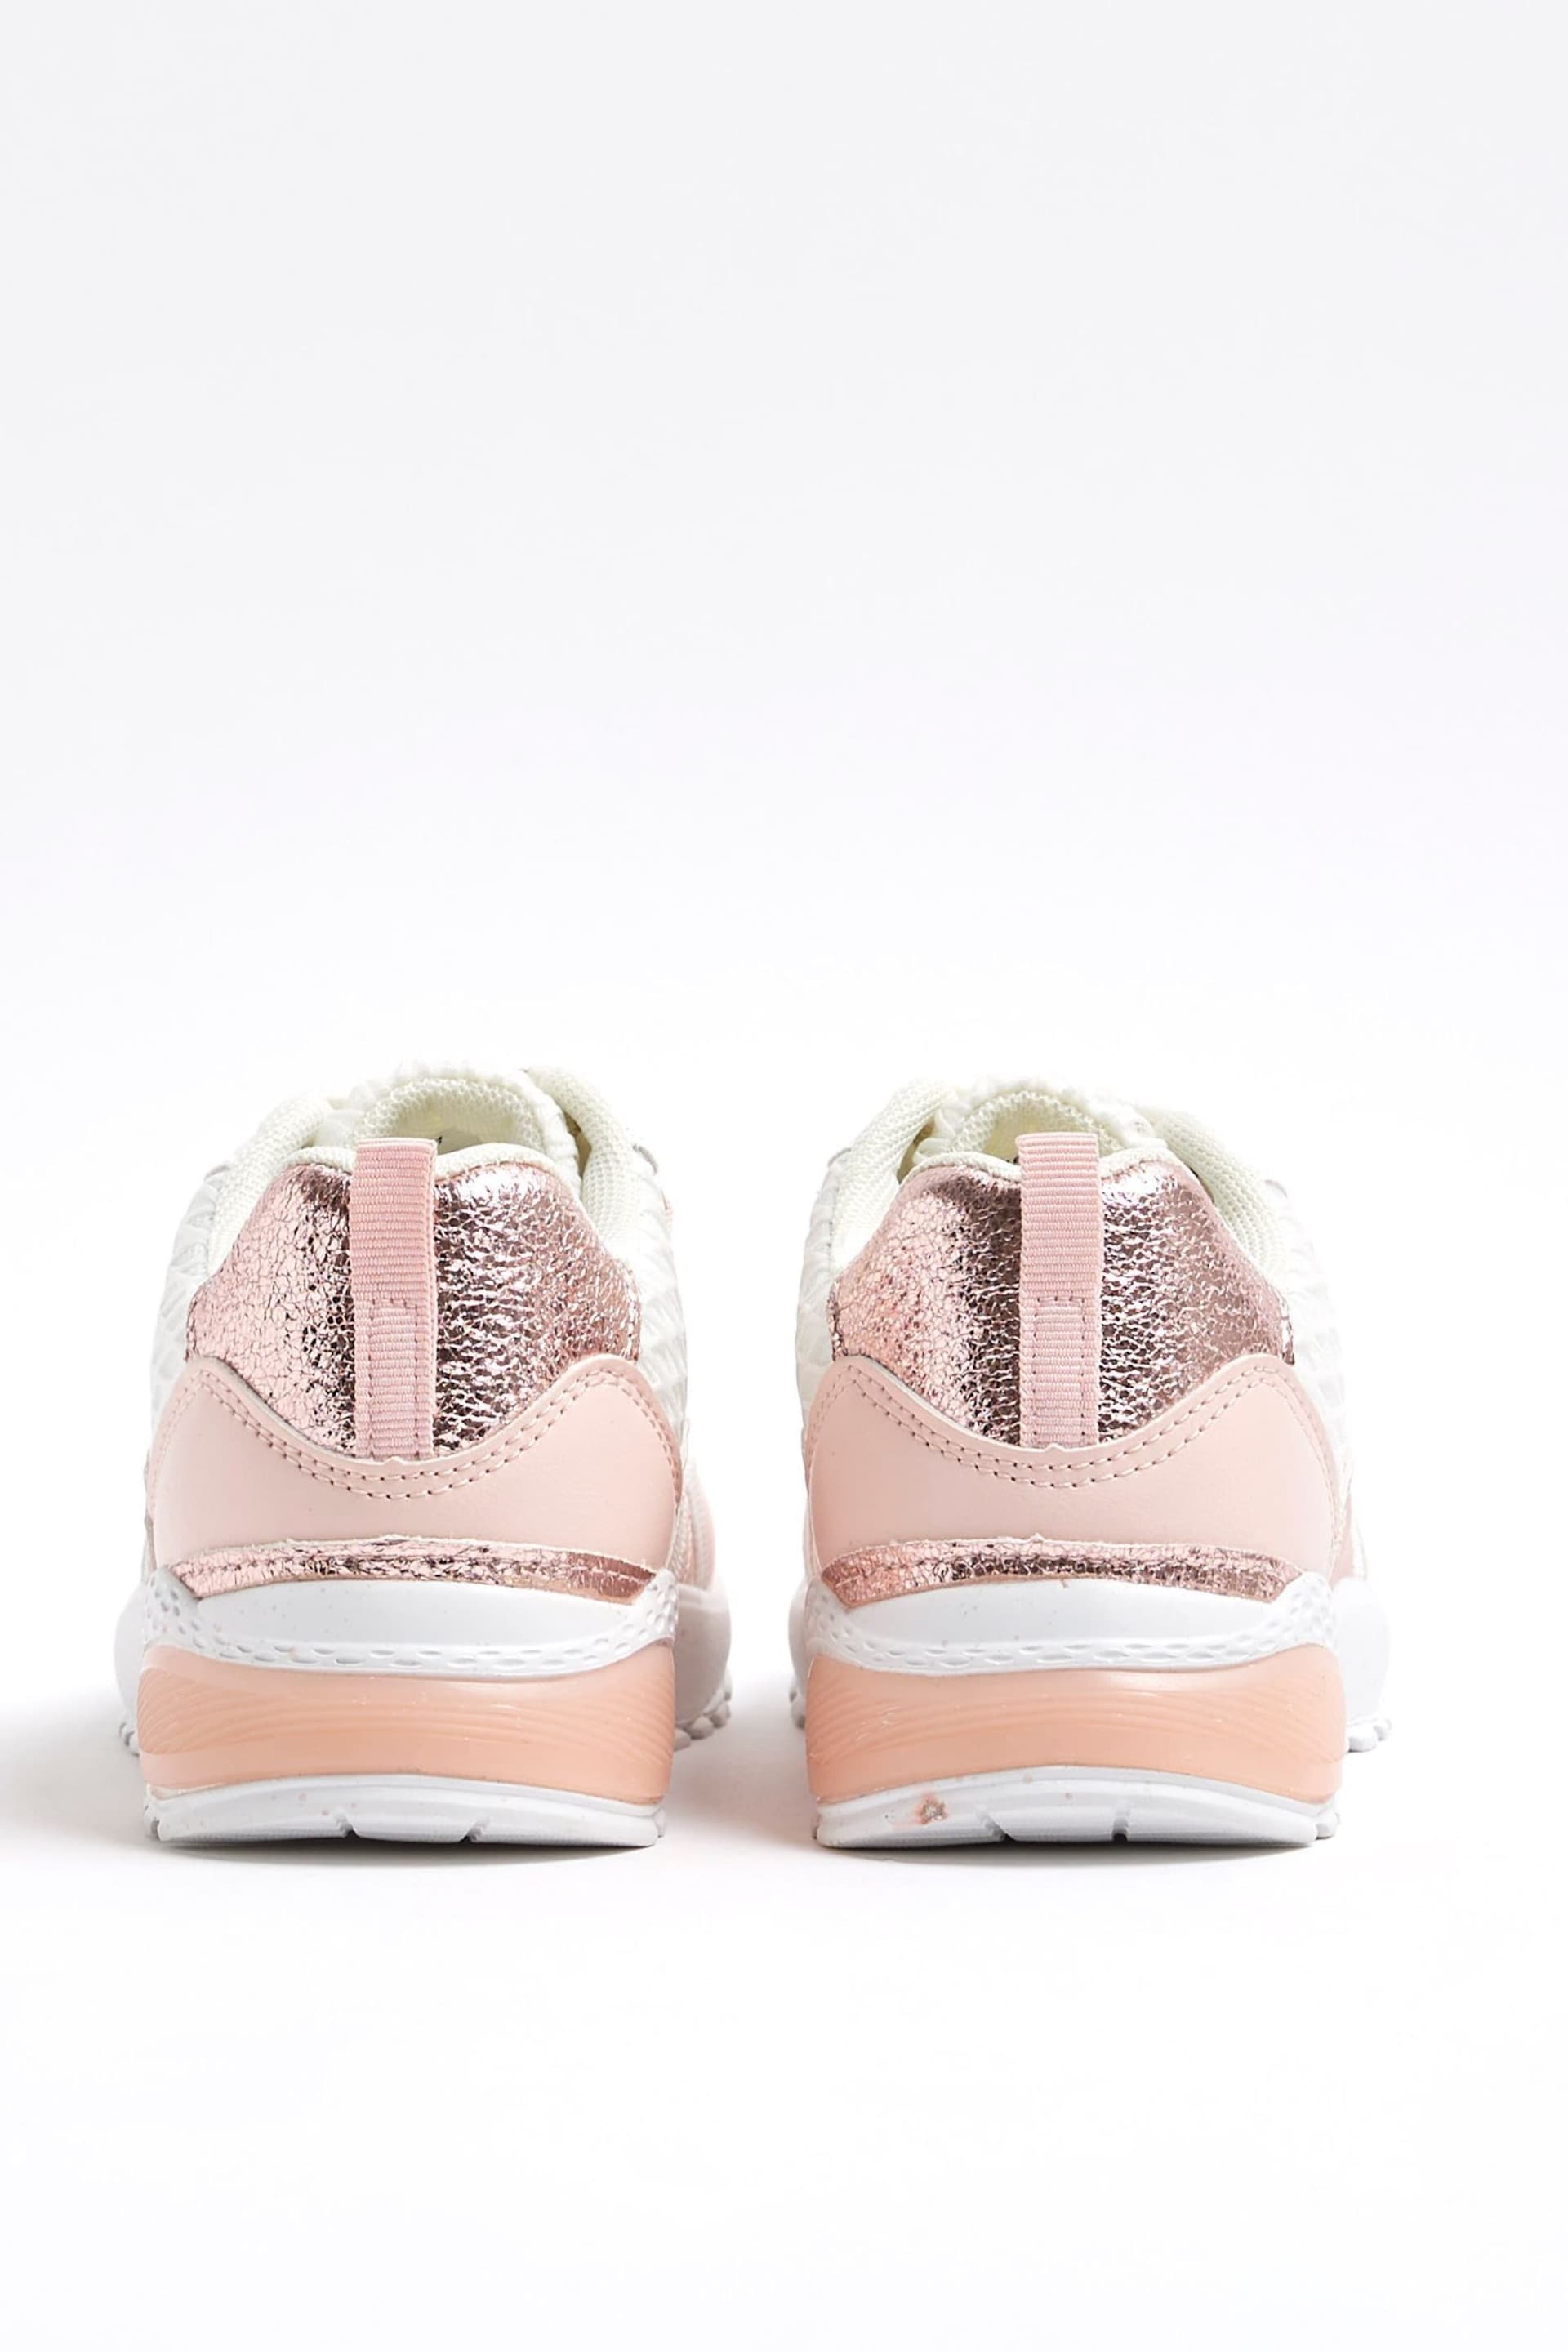 River Island Pink Girls Speckled Sole Trainers - Image 2 of 4